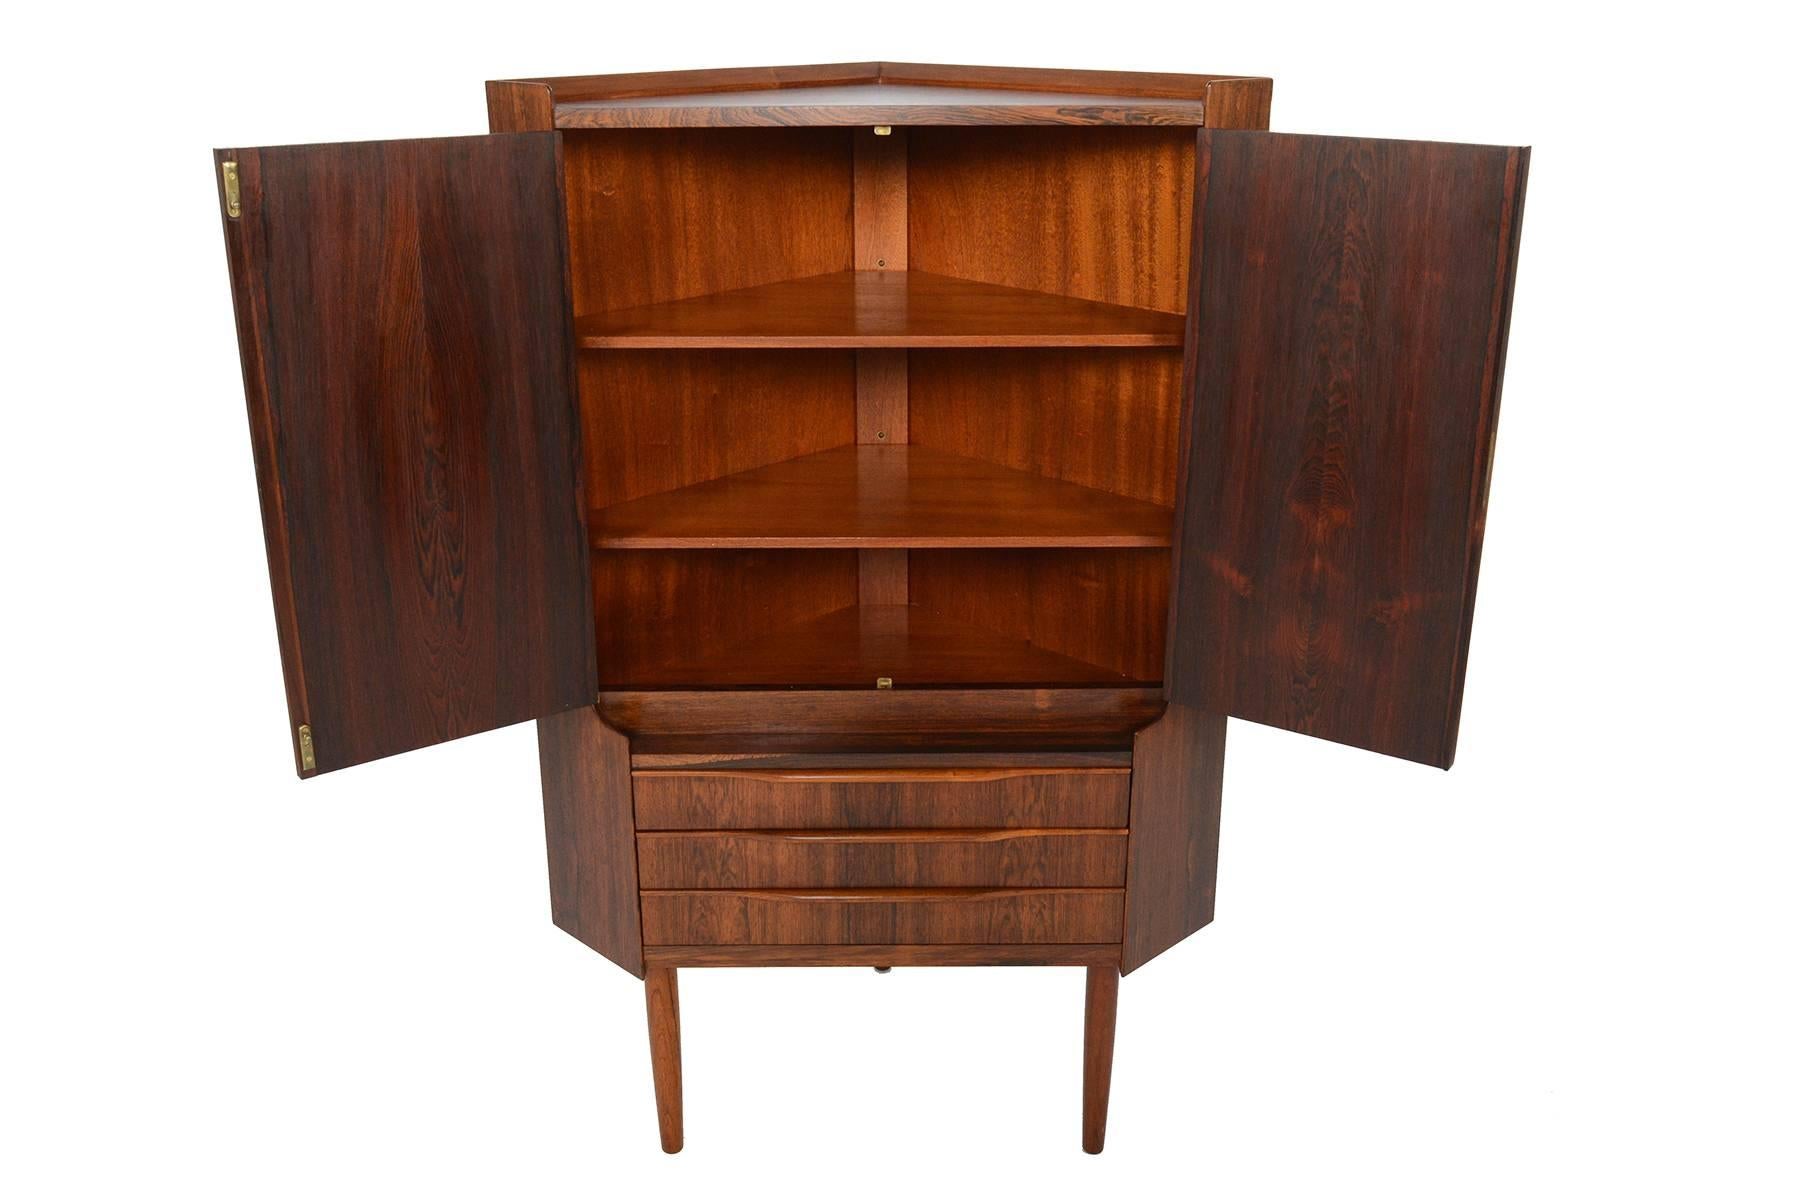 This Danish modern Mid-Century corner cabinet and bar is perfect for any space with limited storage. Crafted in Brazilian rosewood, this piece will tuck easily into any corner of your home, providing you with a ready to use dry bar. Two top locking